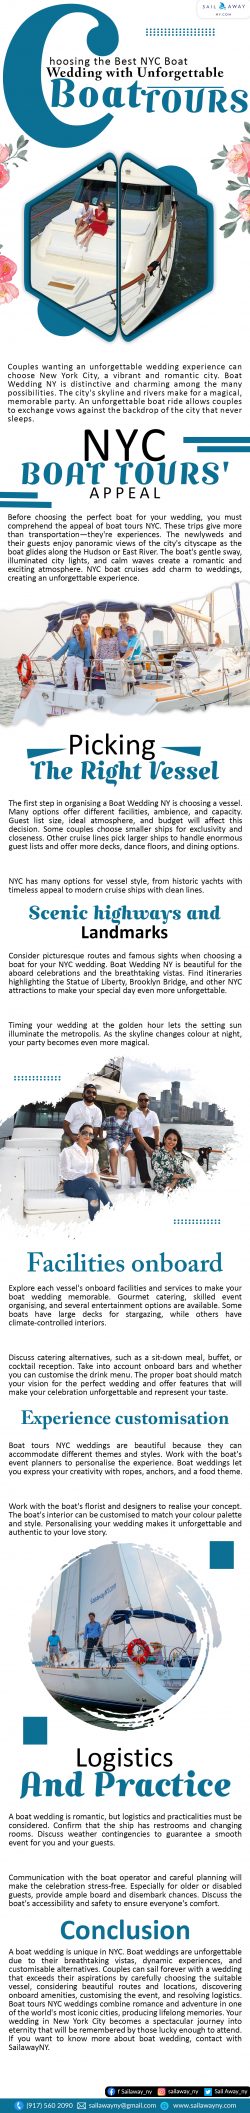 Choosing the Best NYC Boat Wedding with Unforgettable Boat Tours